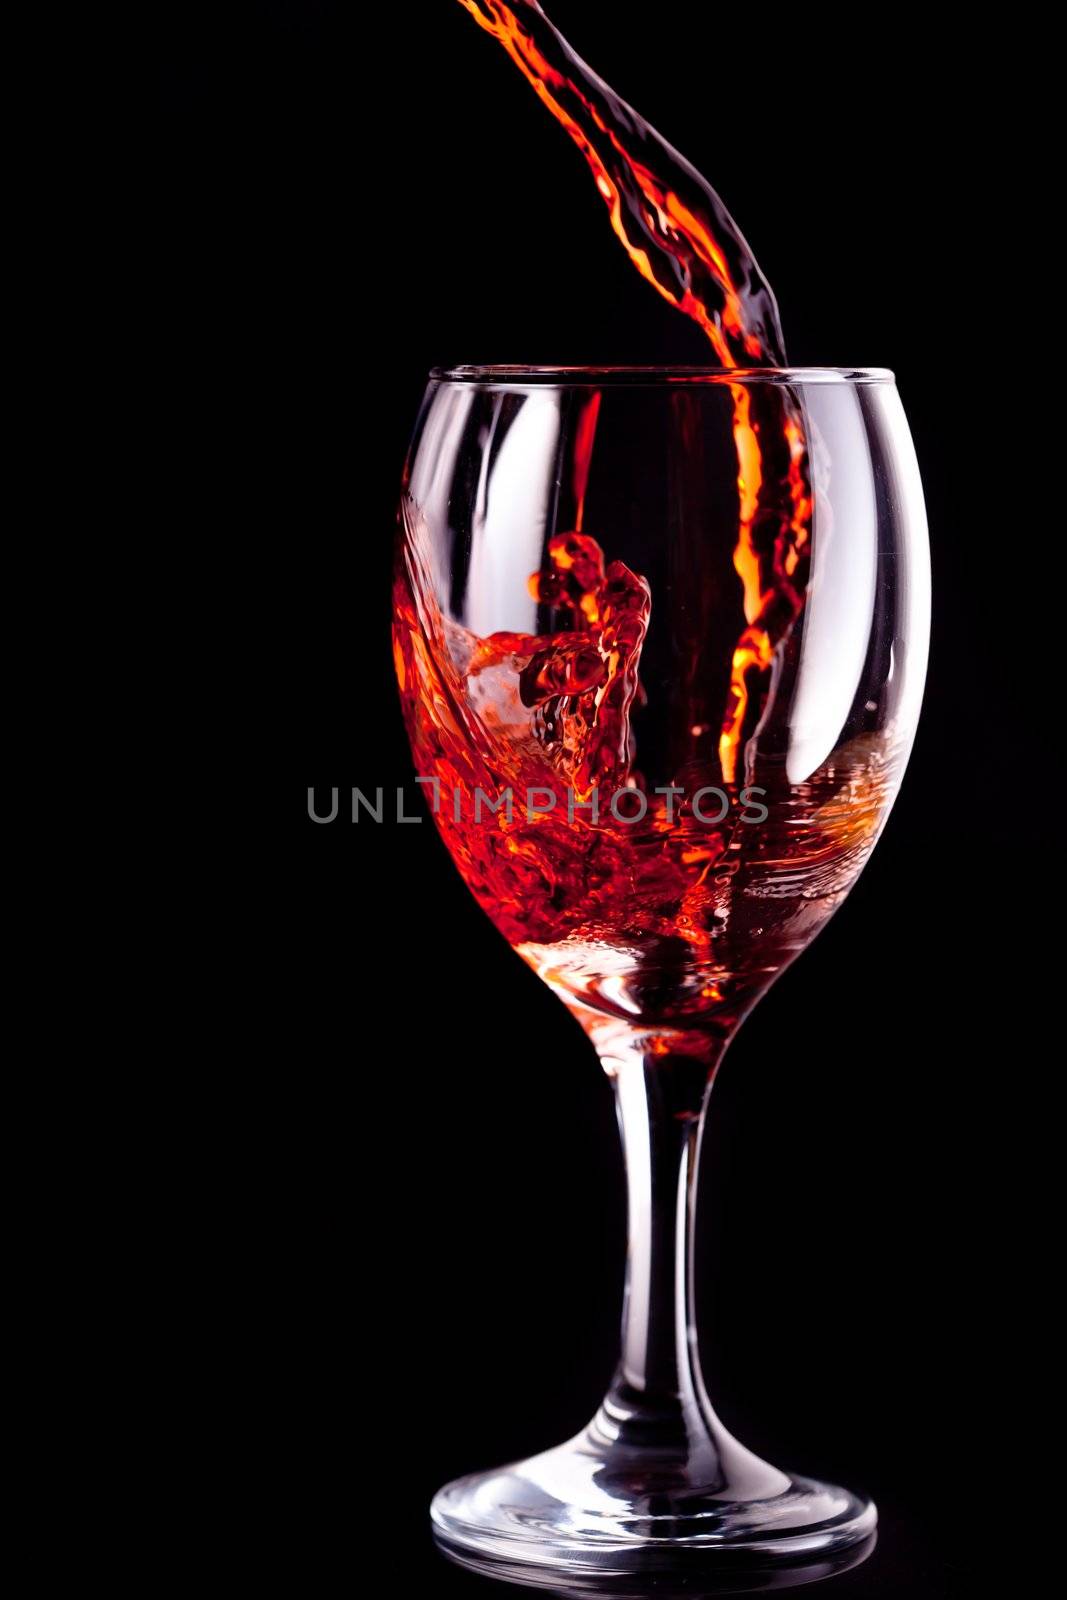 Empty glass being filled with wine against black background